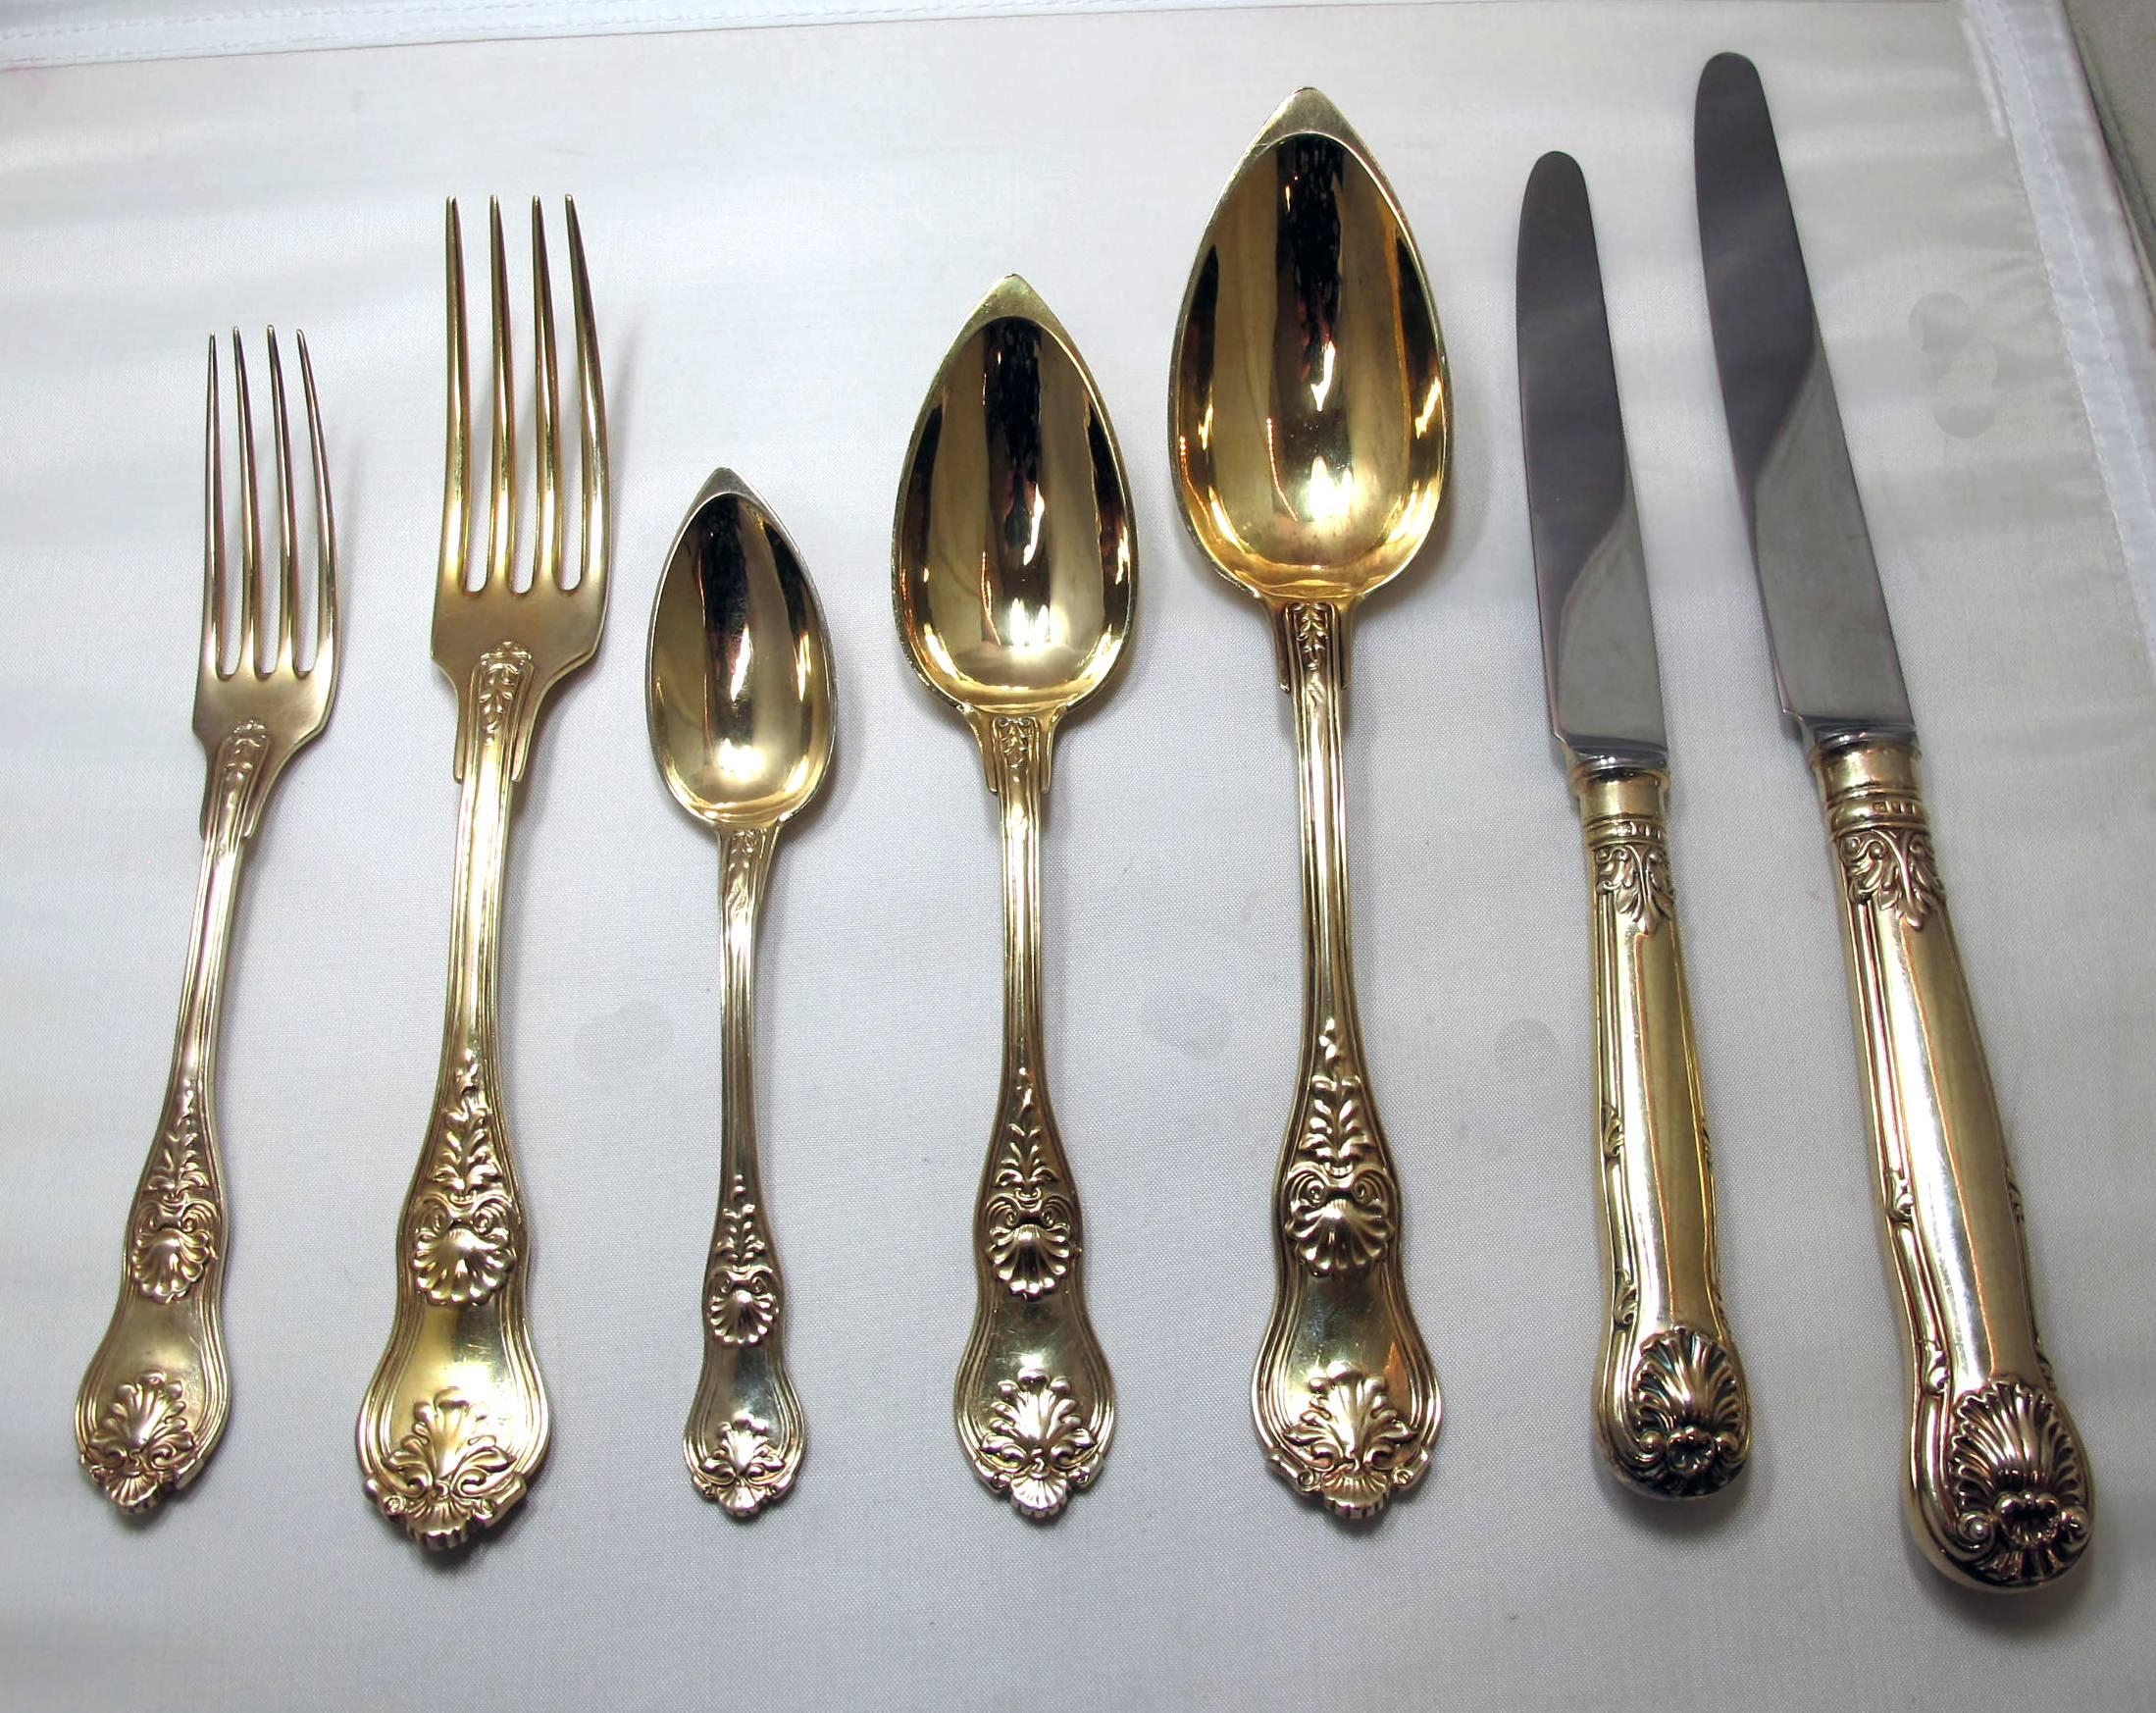 182 piece set of Vermeil 950 Silver French flatware. Knives are marked CJ Vander, the rest of the service is Maison Deniere from the mid 19th century. The service includes:
36 Dinner knives 
36 Dinner forks
36 Soup spoons
18 tea/coffee spoons
18 